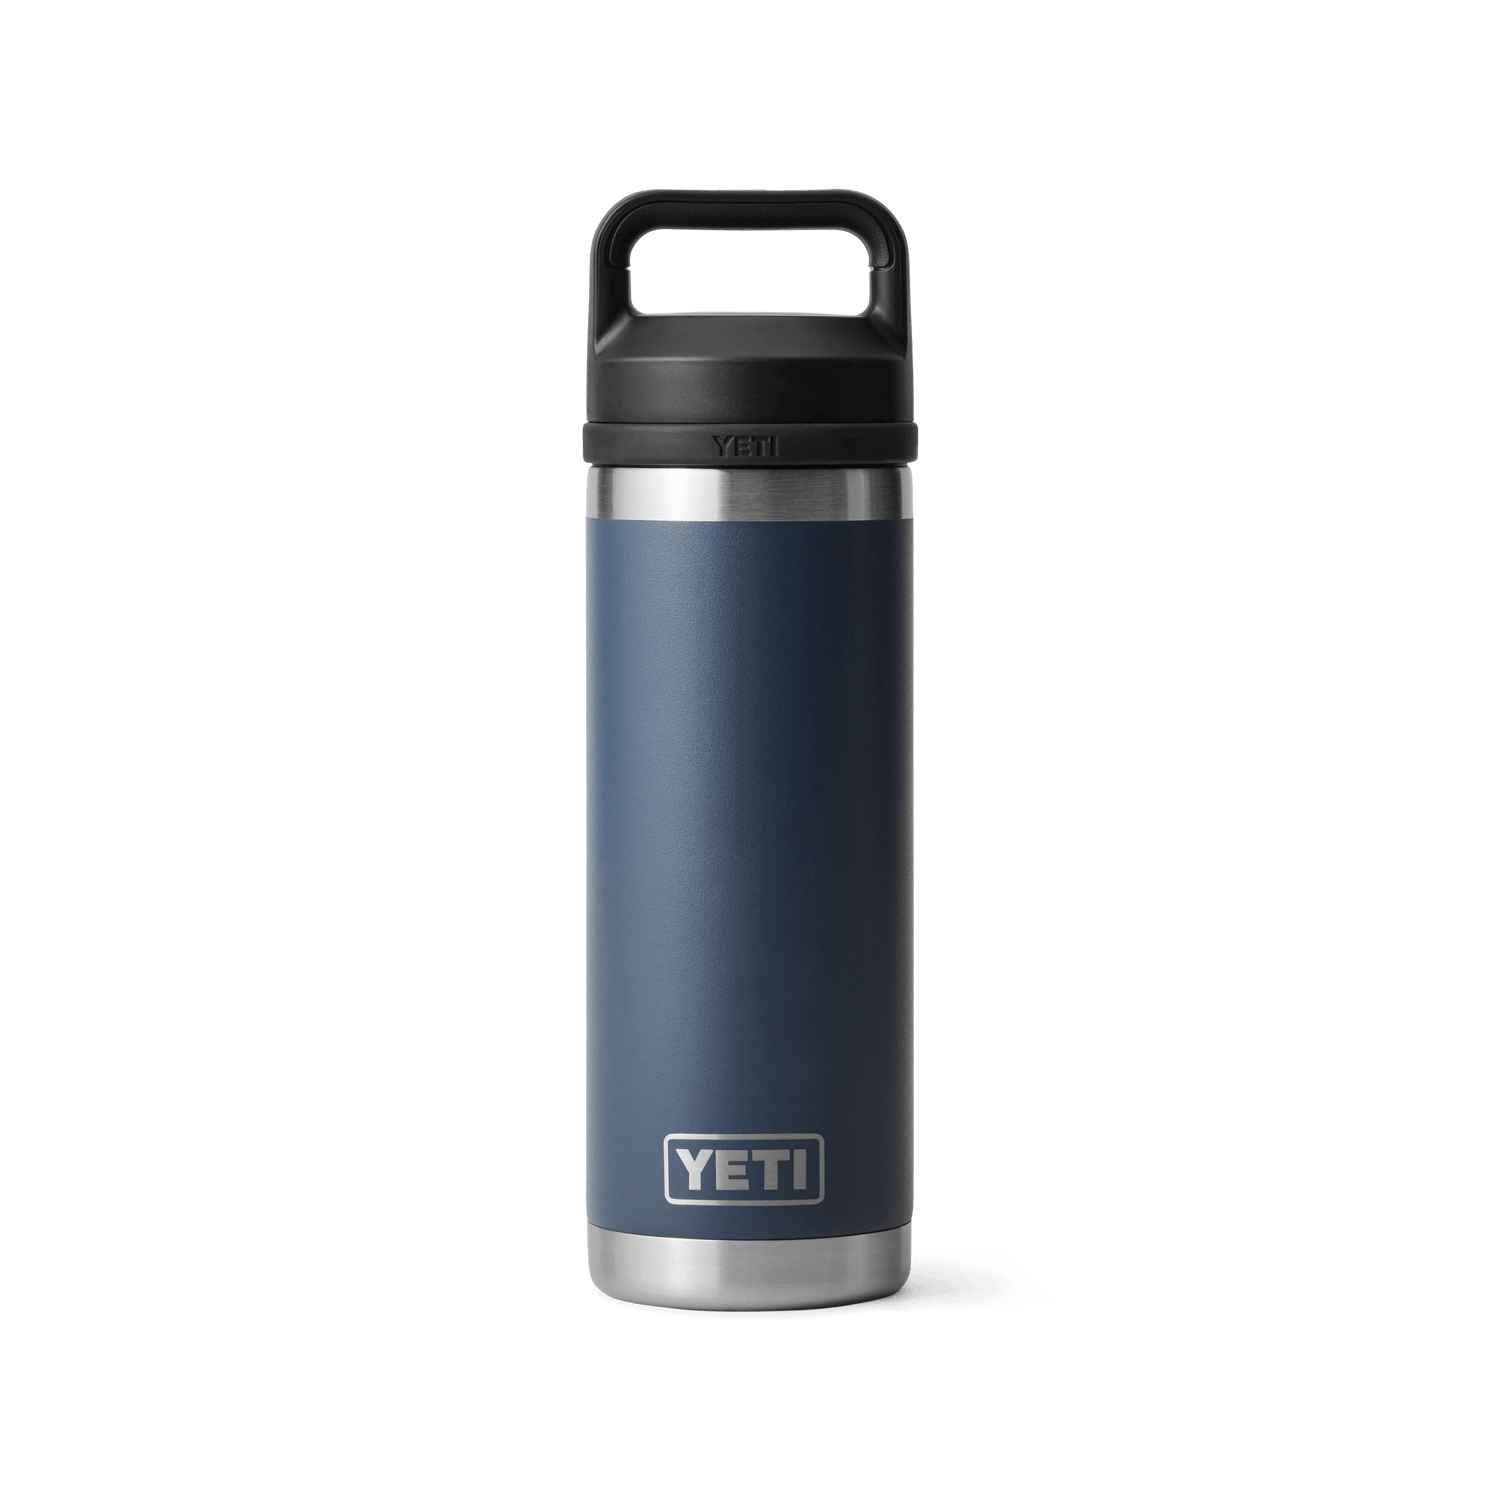 YETI 46oz Bottle HARVEST RED Limited Edition - Sold Out - Brand New